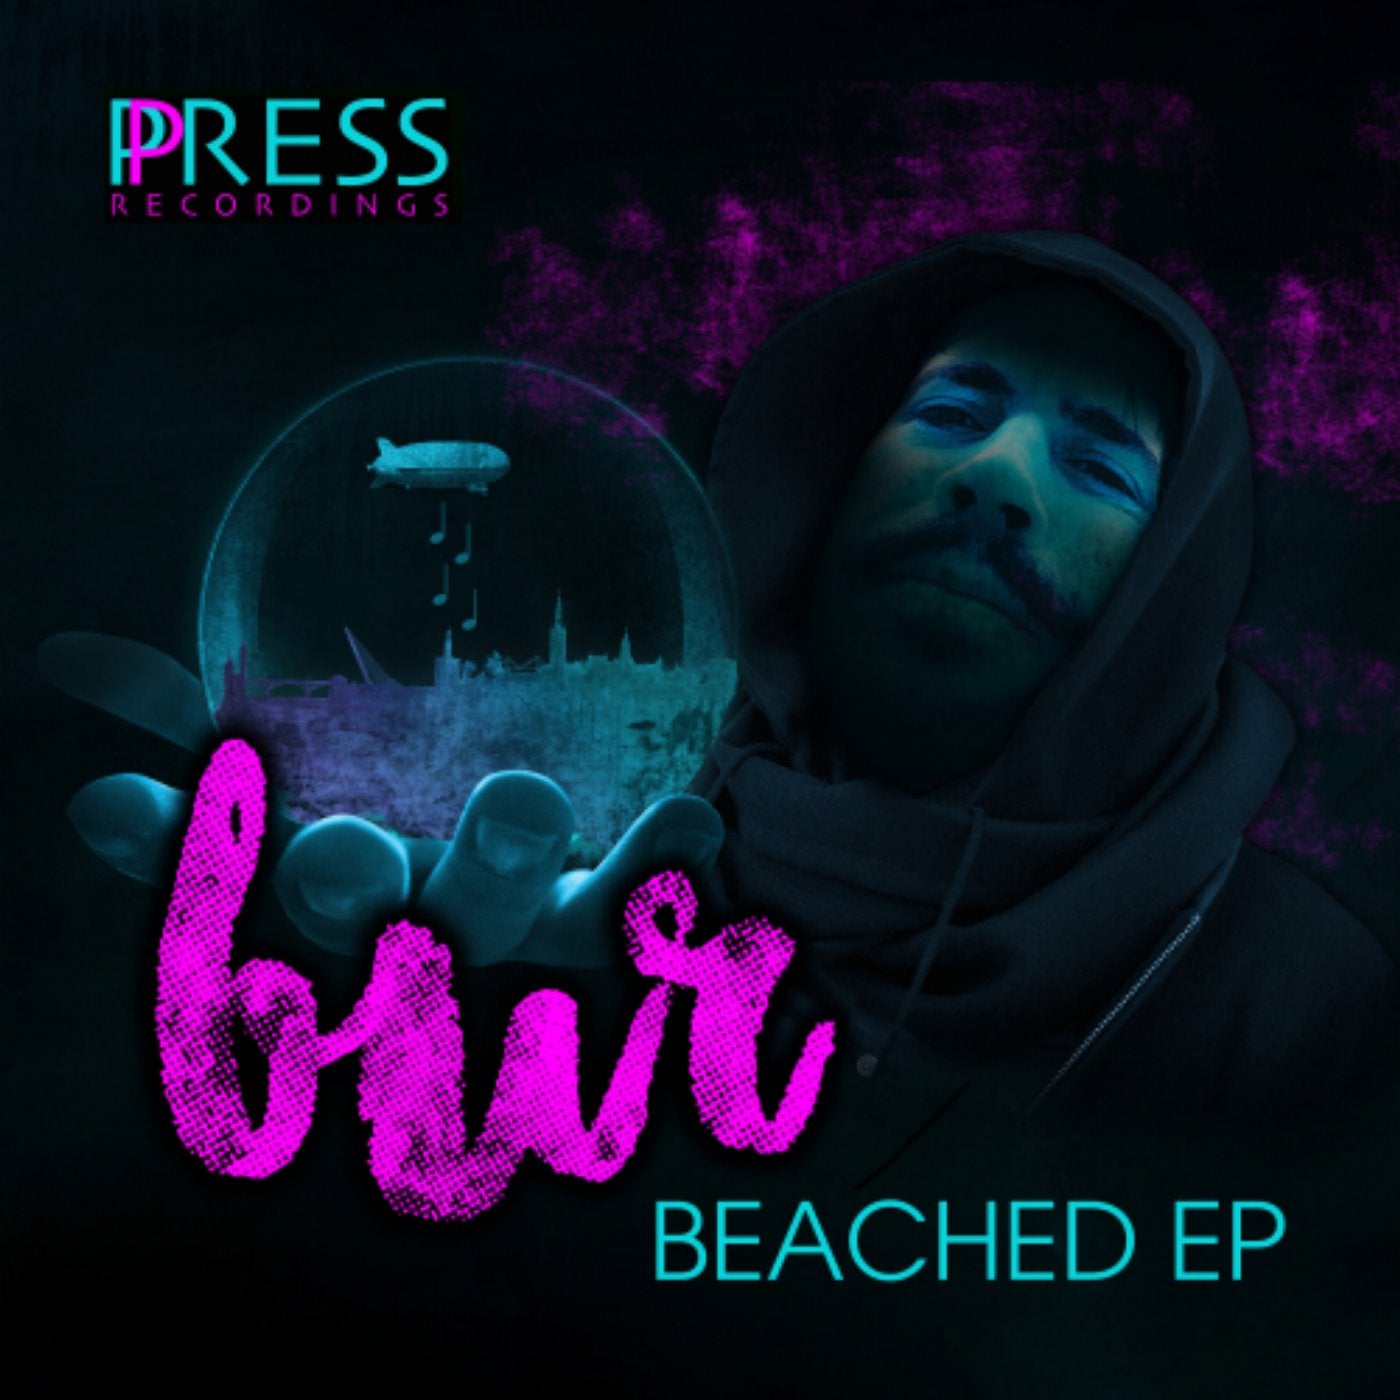 Beached EP